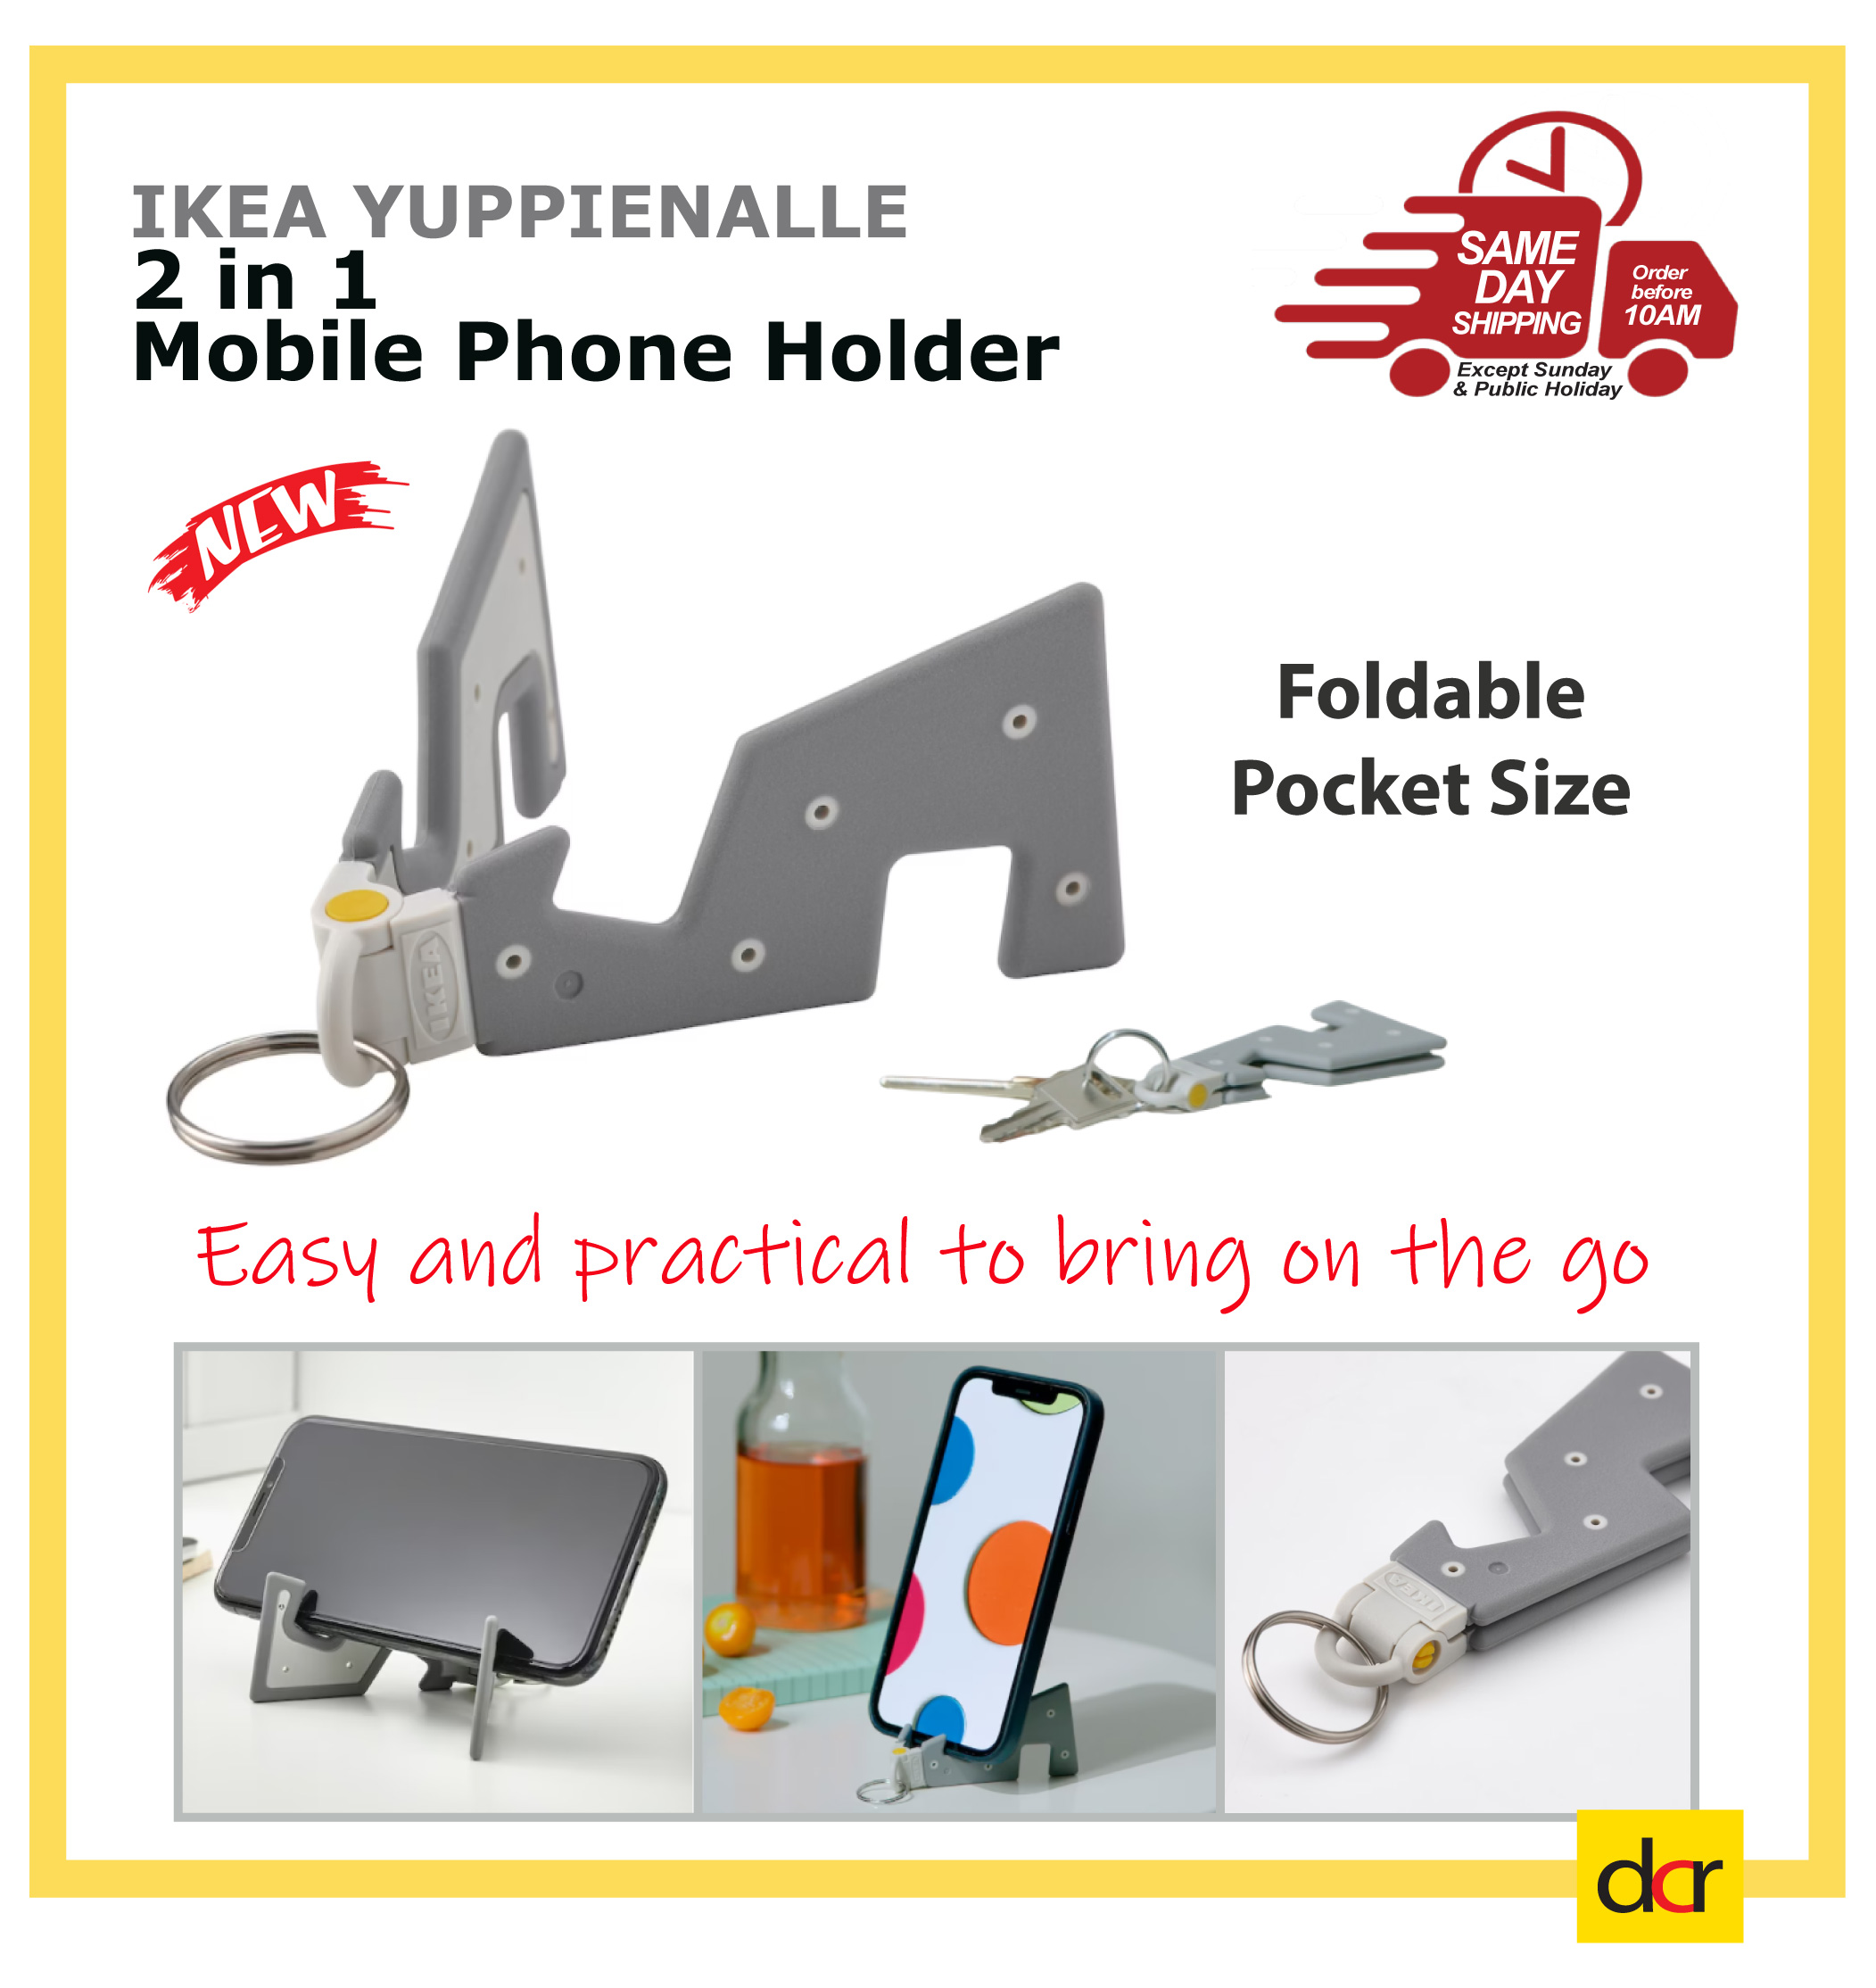 YUPPIENALLE holder for mobile phone, grey - IKEA